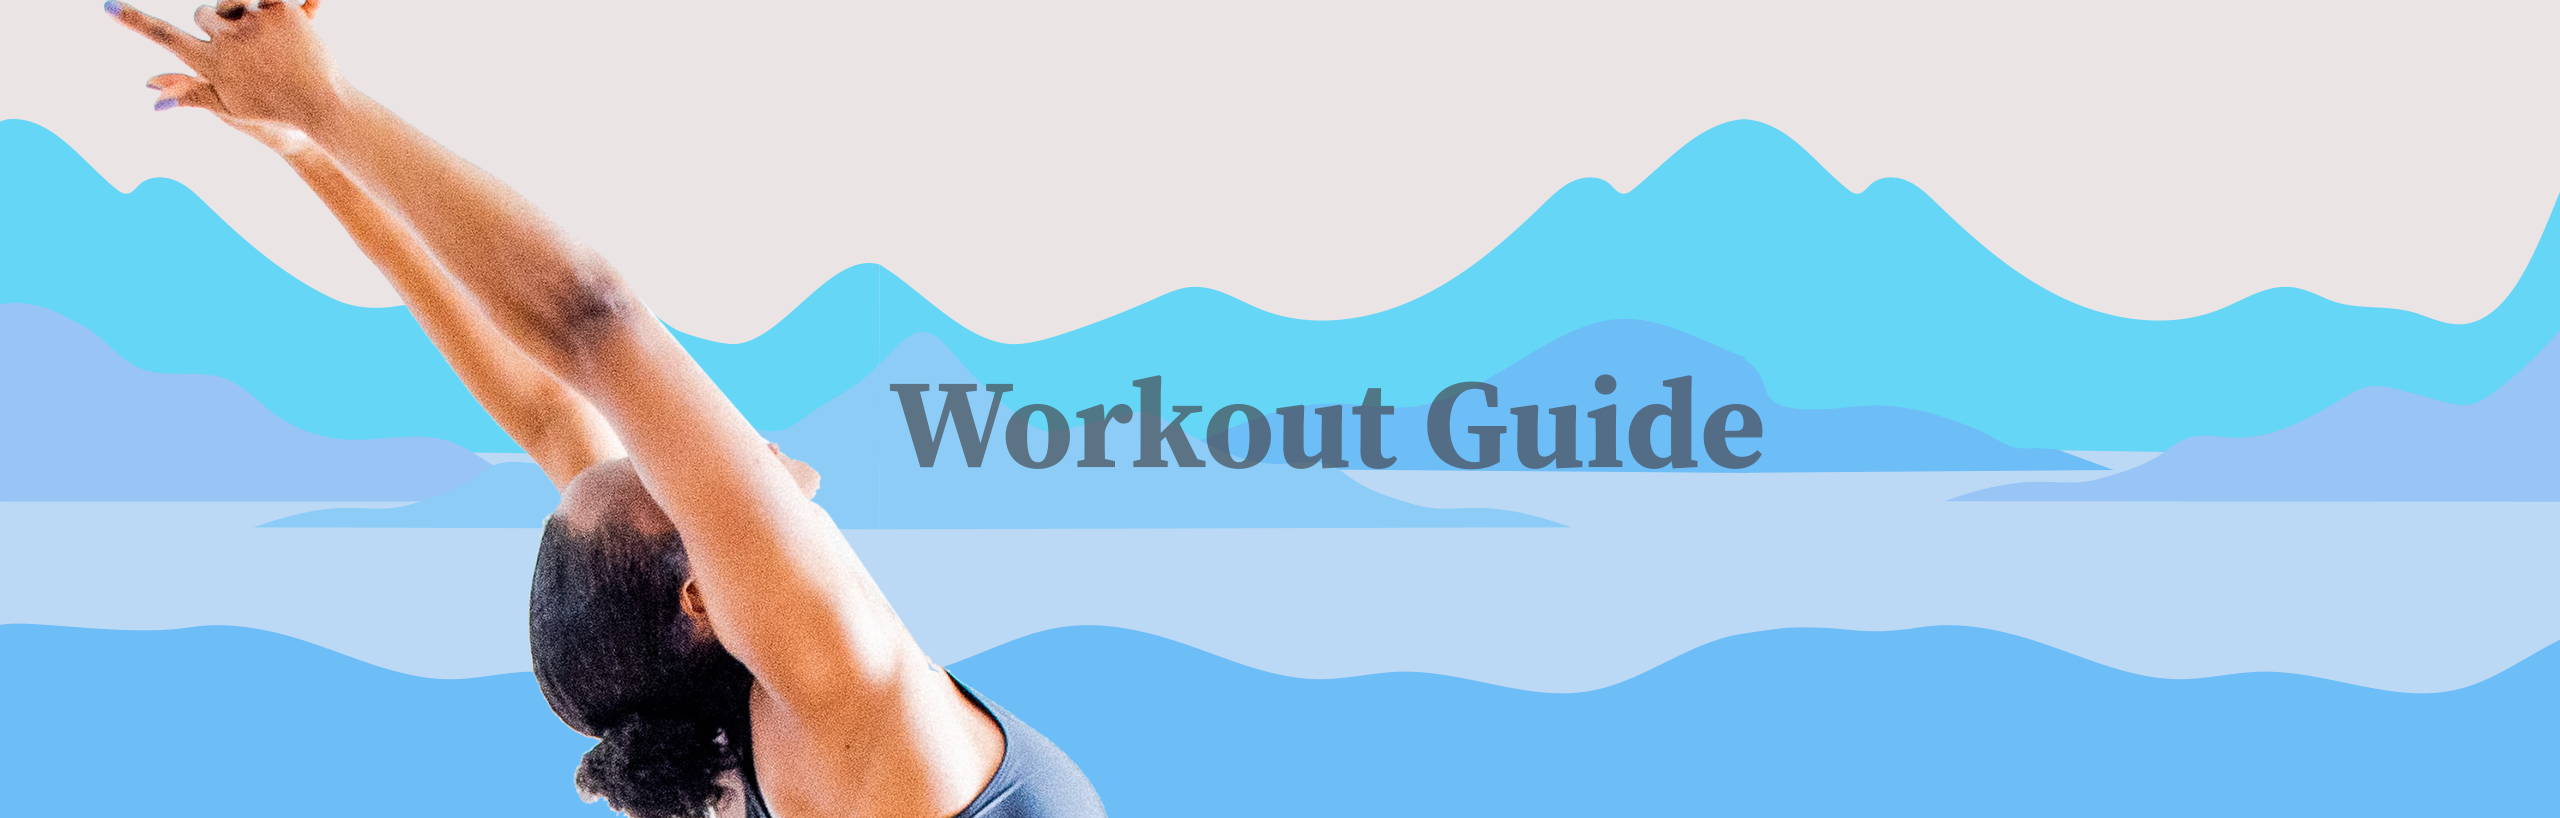 Workout Guide